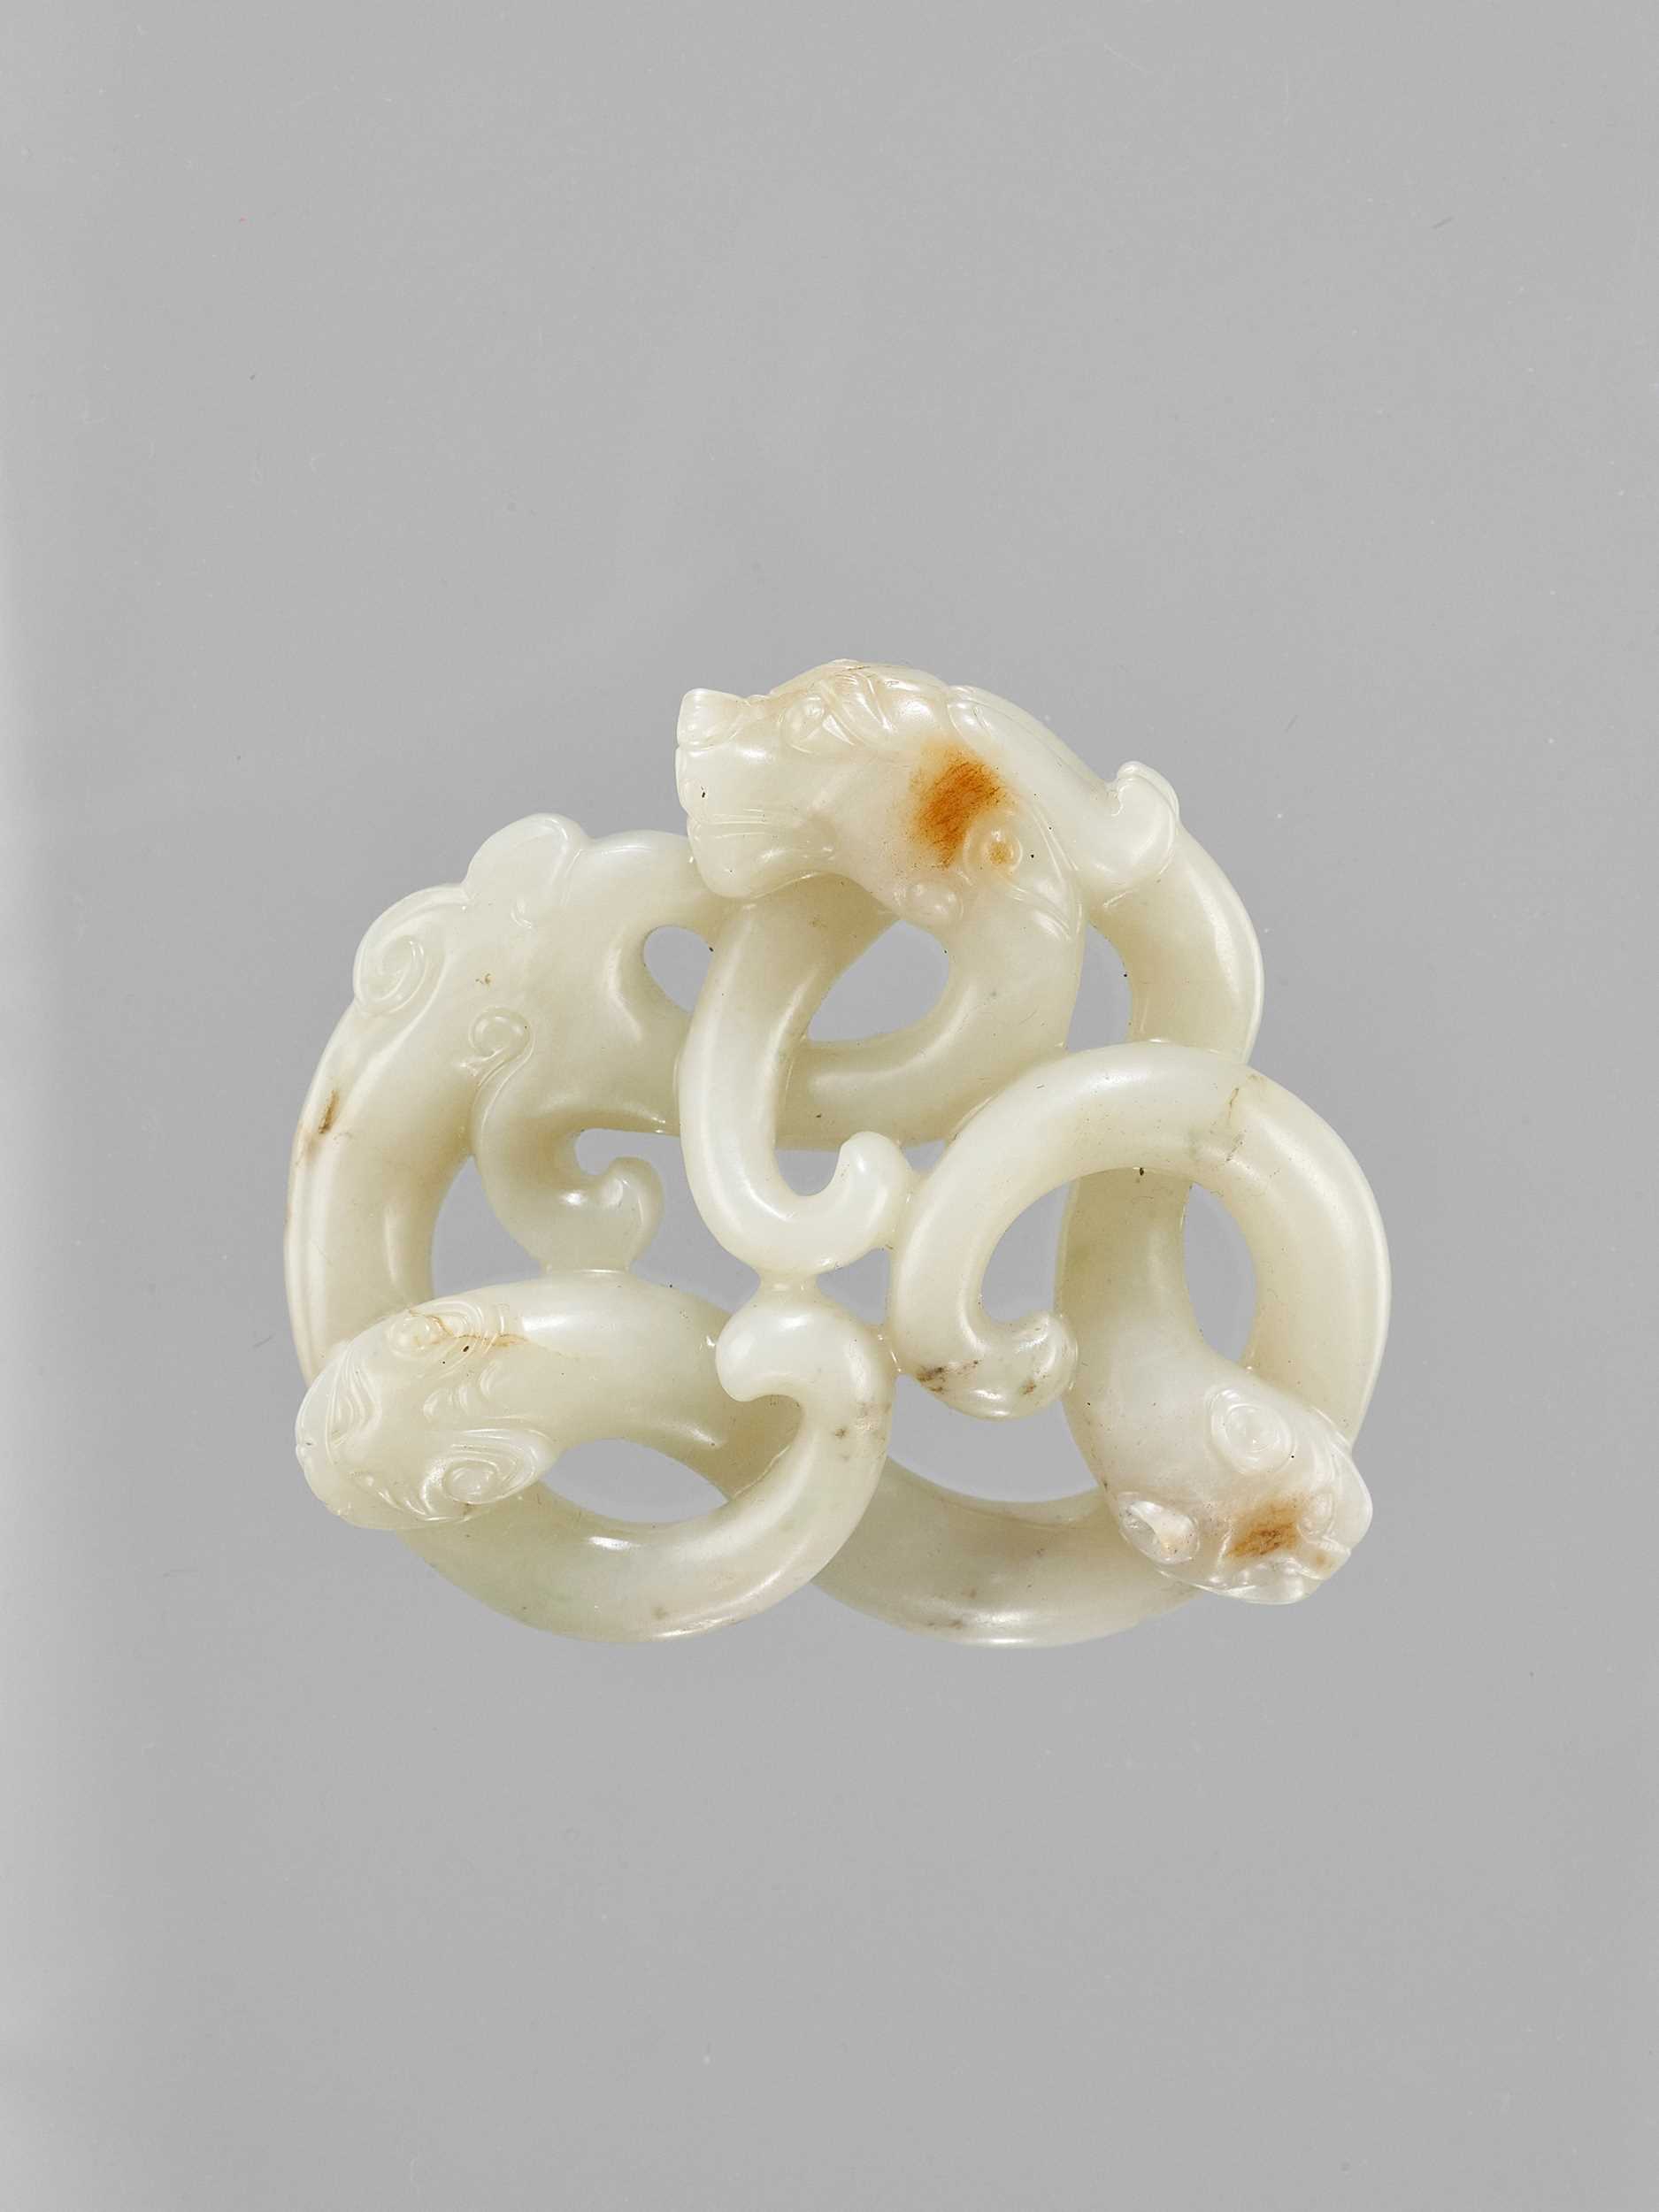 Lot 786 - A LARGE CELADON JADE CARVING OF THREE INTERTWINED DRAGONS, LATE QING TO REPUBLIC